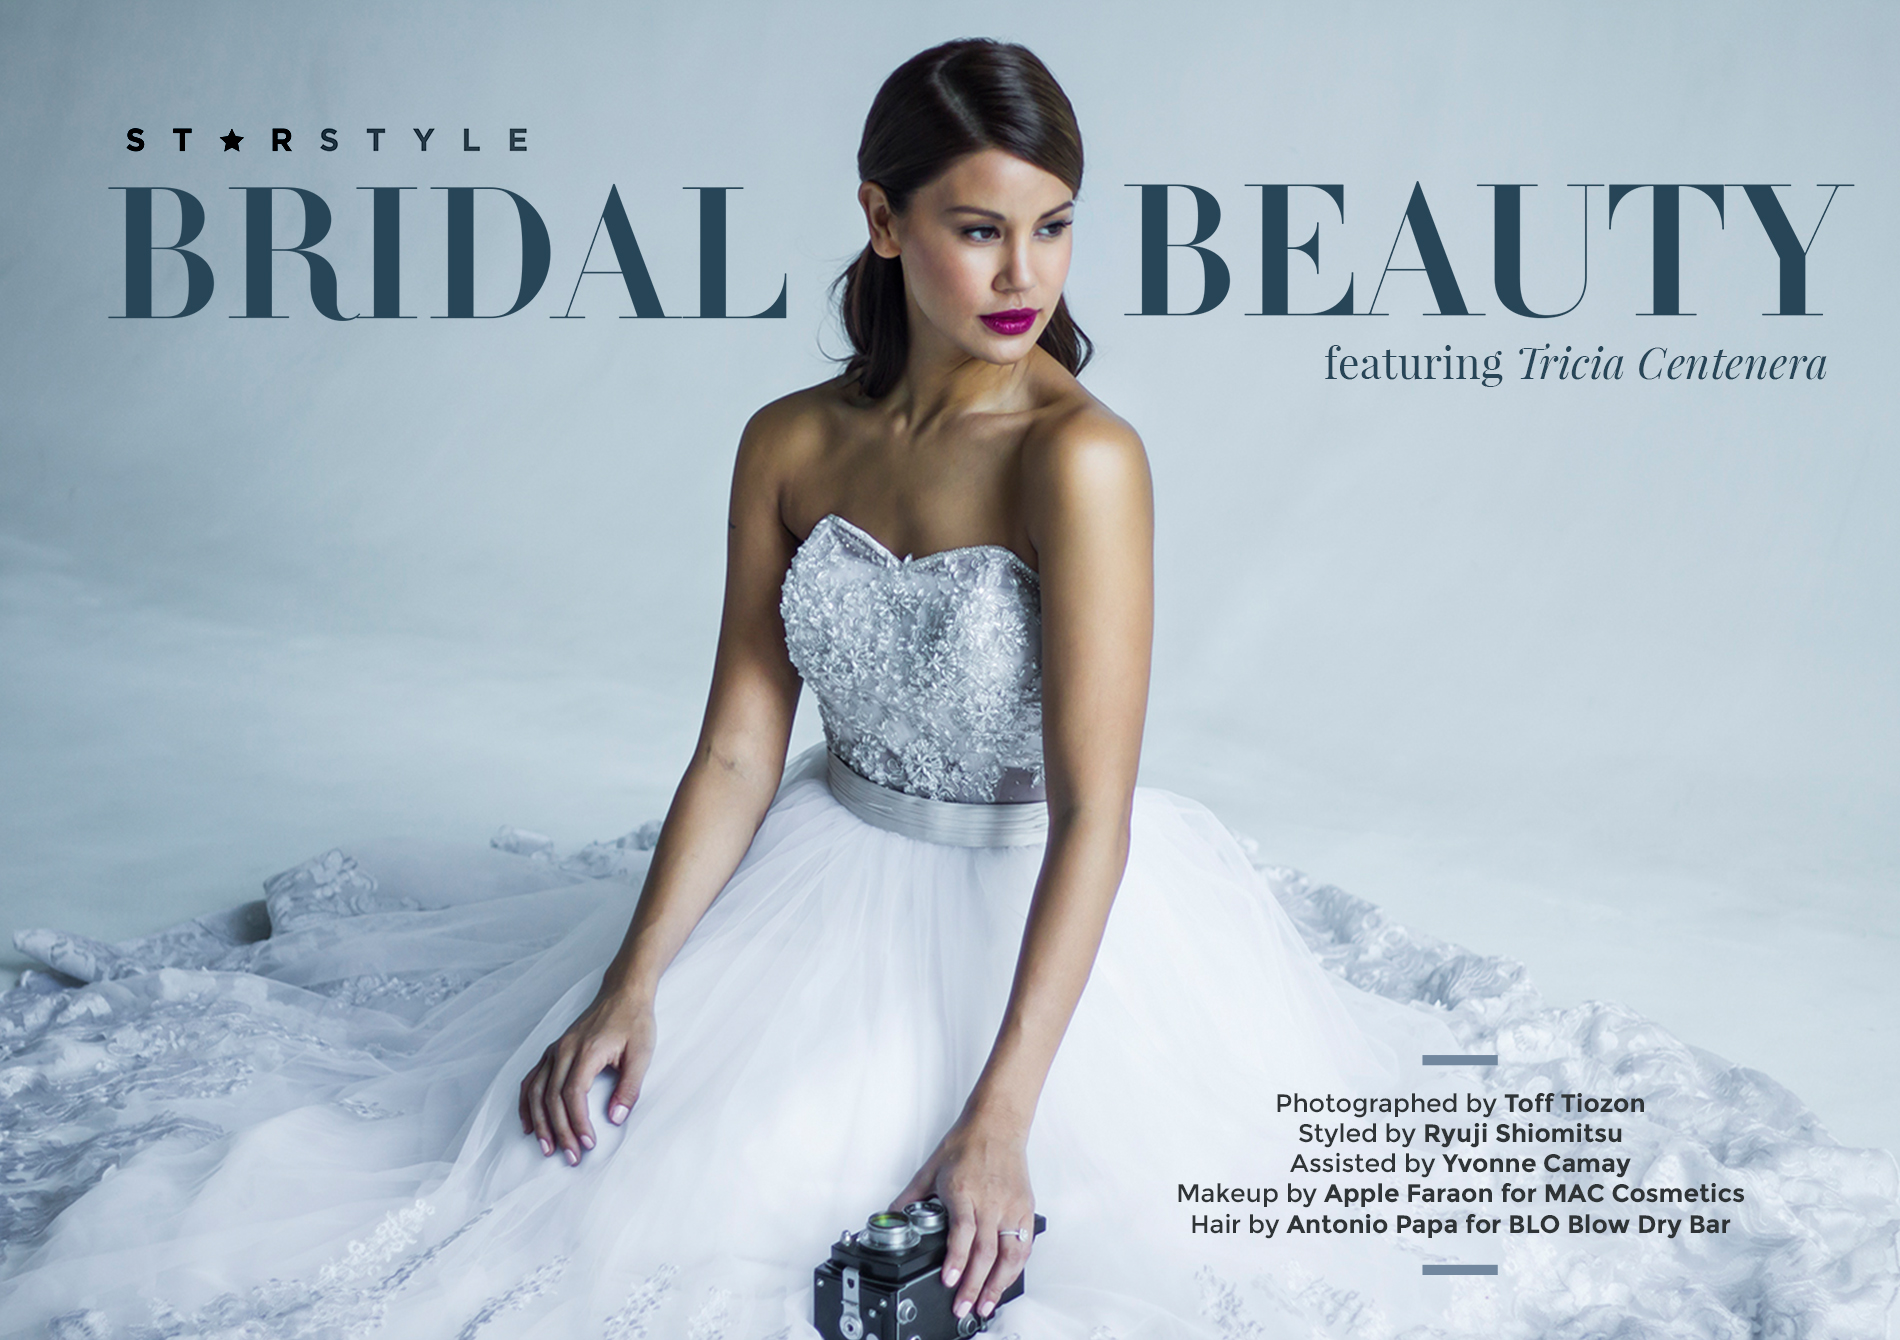 Bridal Beauty Featuring Tricia Centenera - Star Style